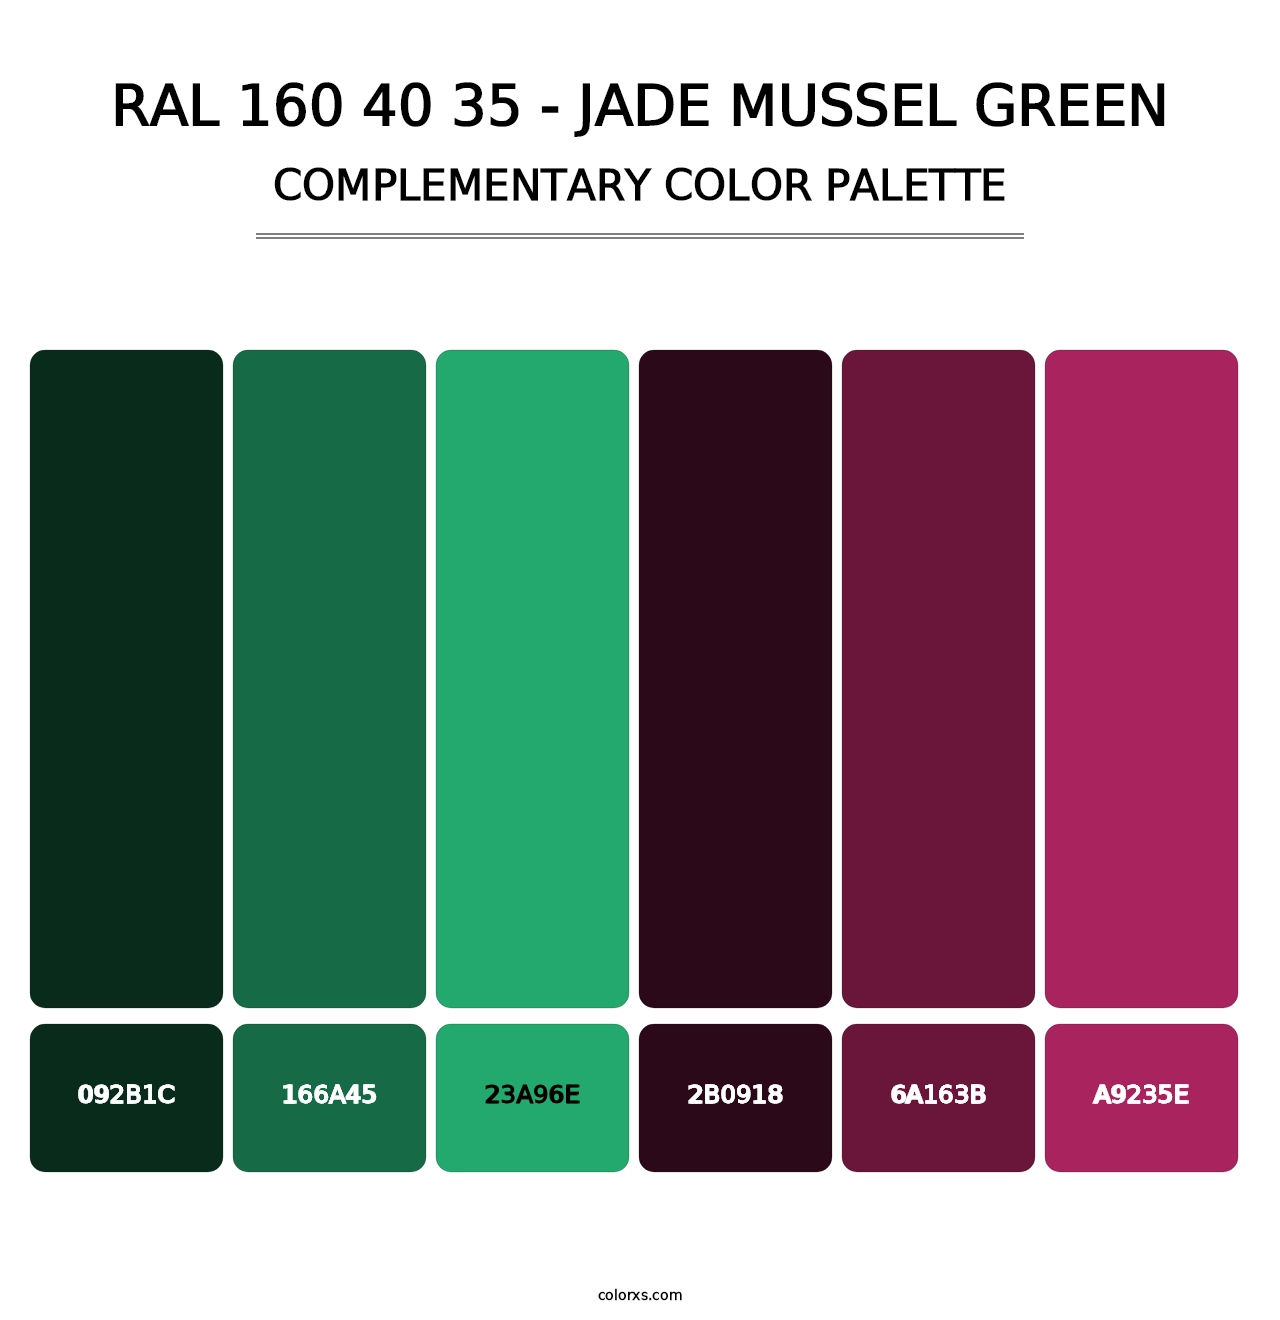 RAL 160 40 35 - Jade Mussel Green - Complementary Color Palette